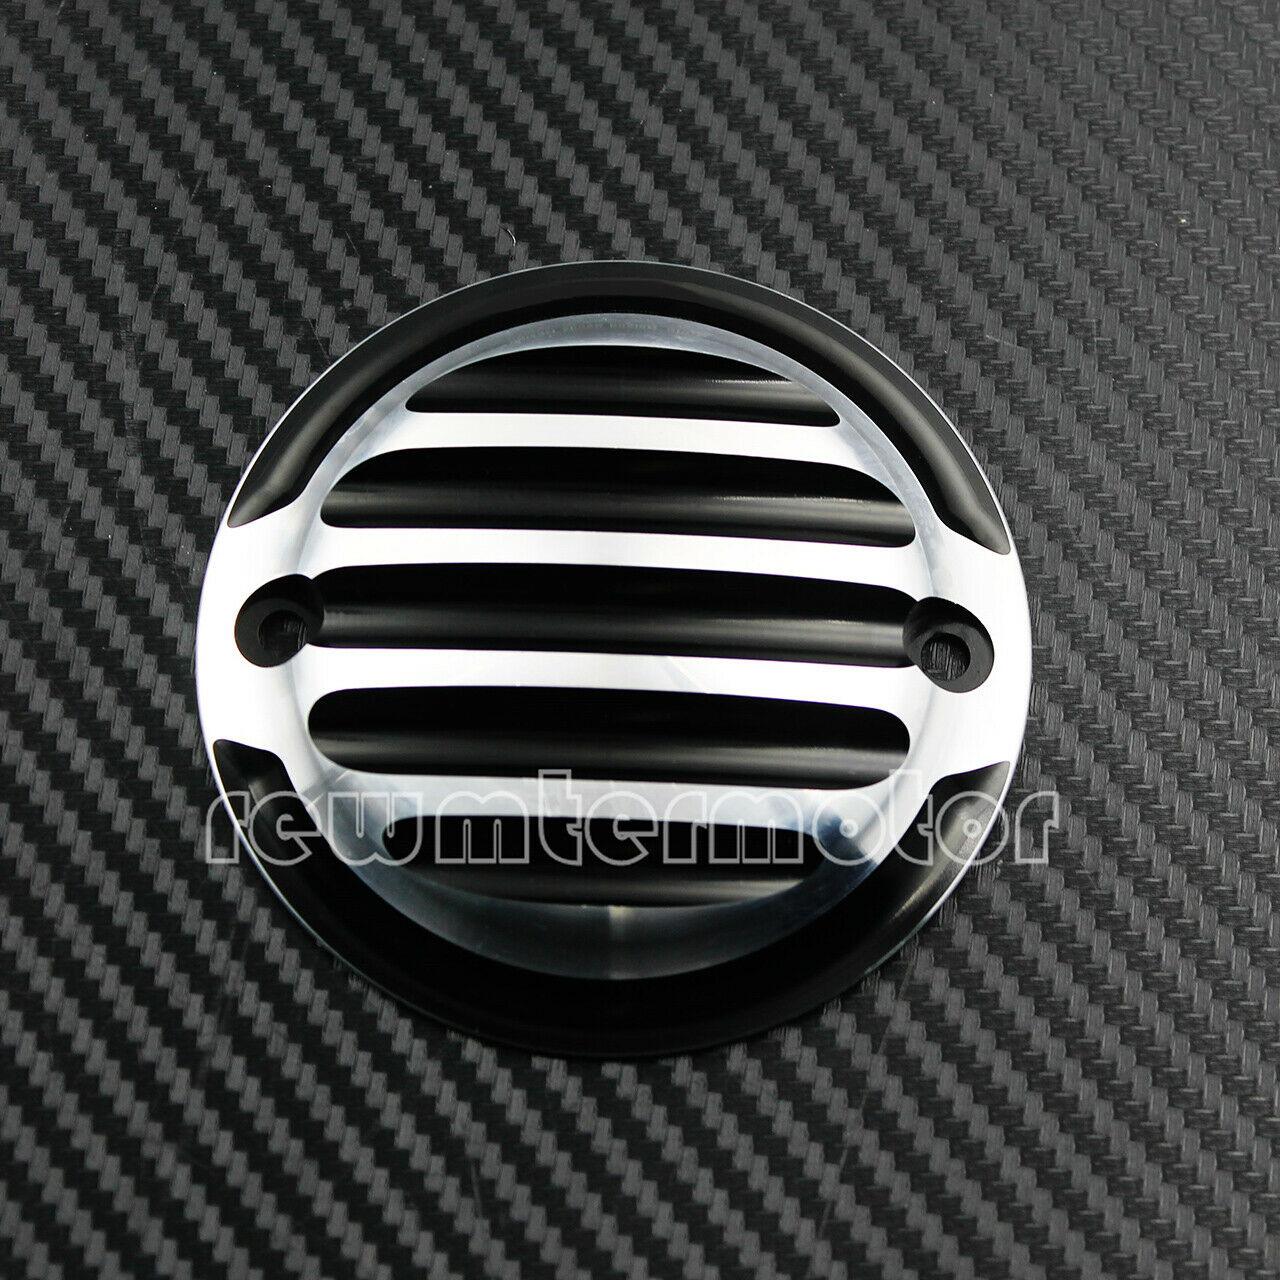 Fence Derby Cover Timing Timer Cover Fit For Sportster 04-up Chrome & Black - Moto Life Products